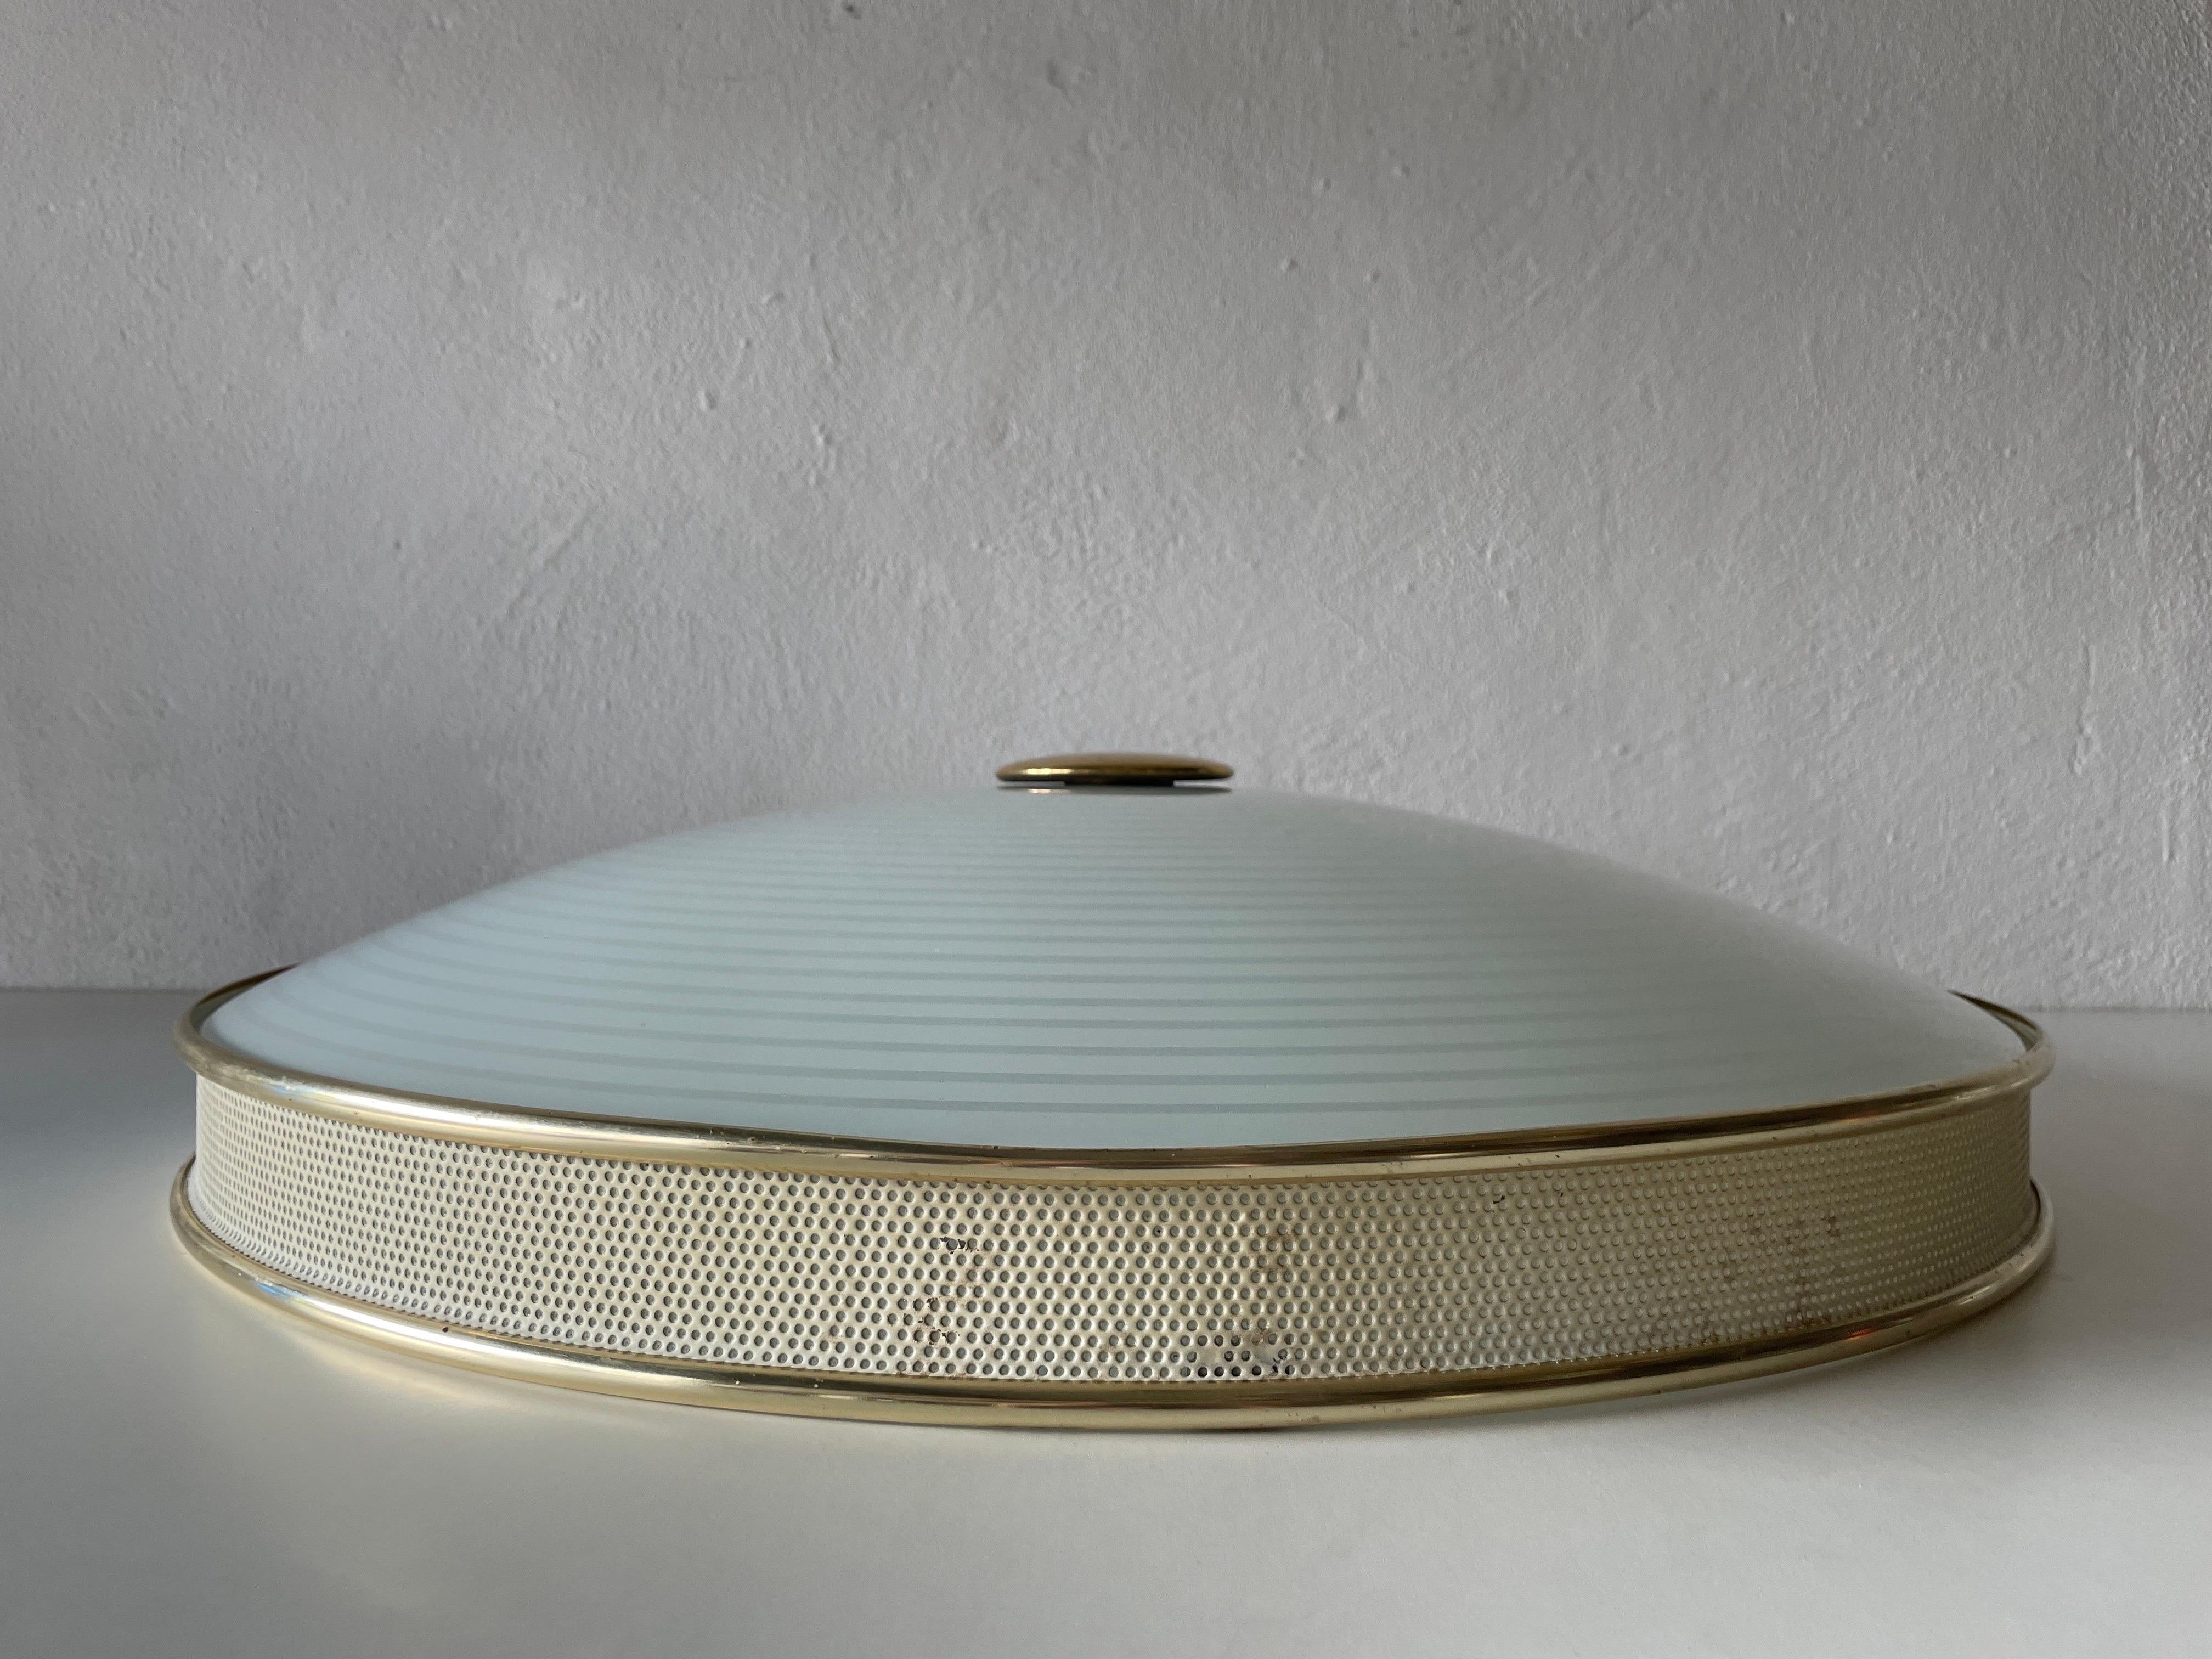 Ufo Design Glass Metal Flush Mount Ceiling Lamp by Hillebrand, 1950s, Germany For Sale 2